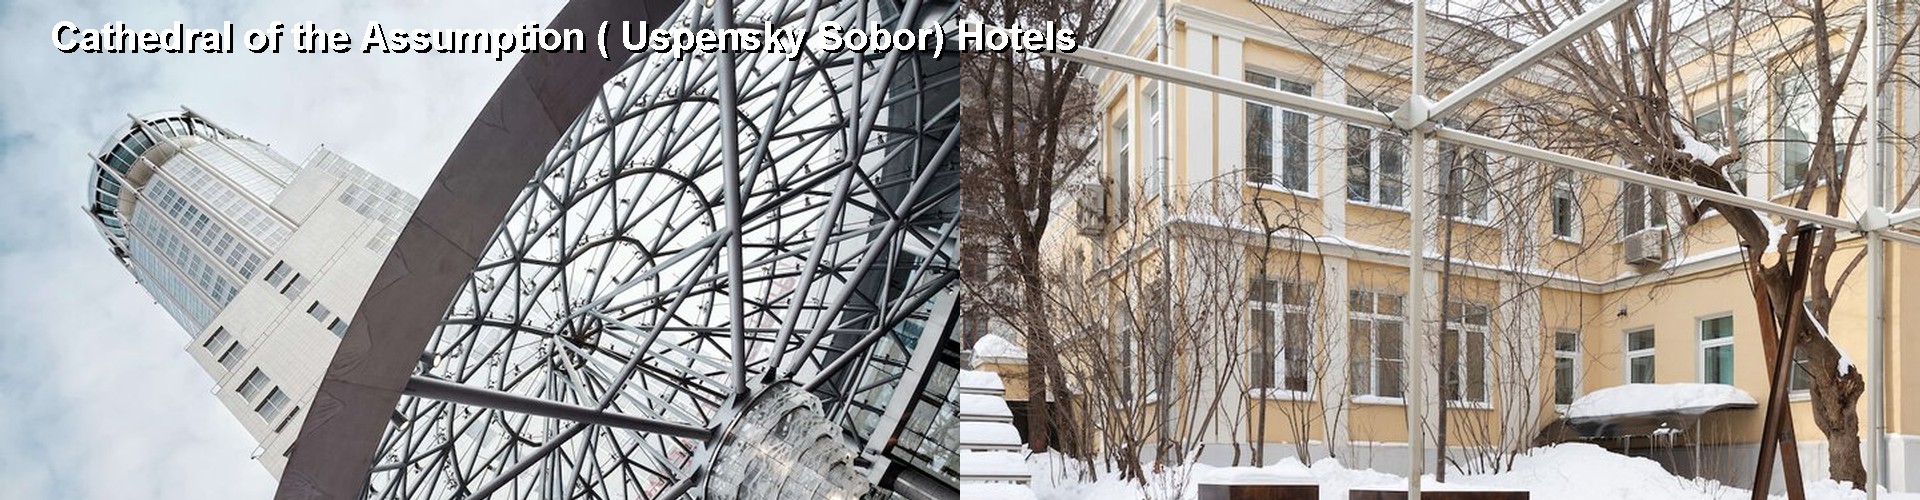 5 Best Hotels near Cathedral of the Assumption ( Uspensky Sobor)